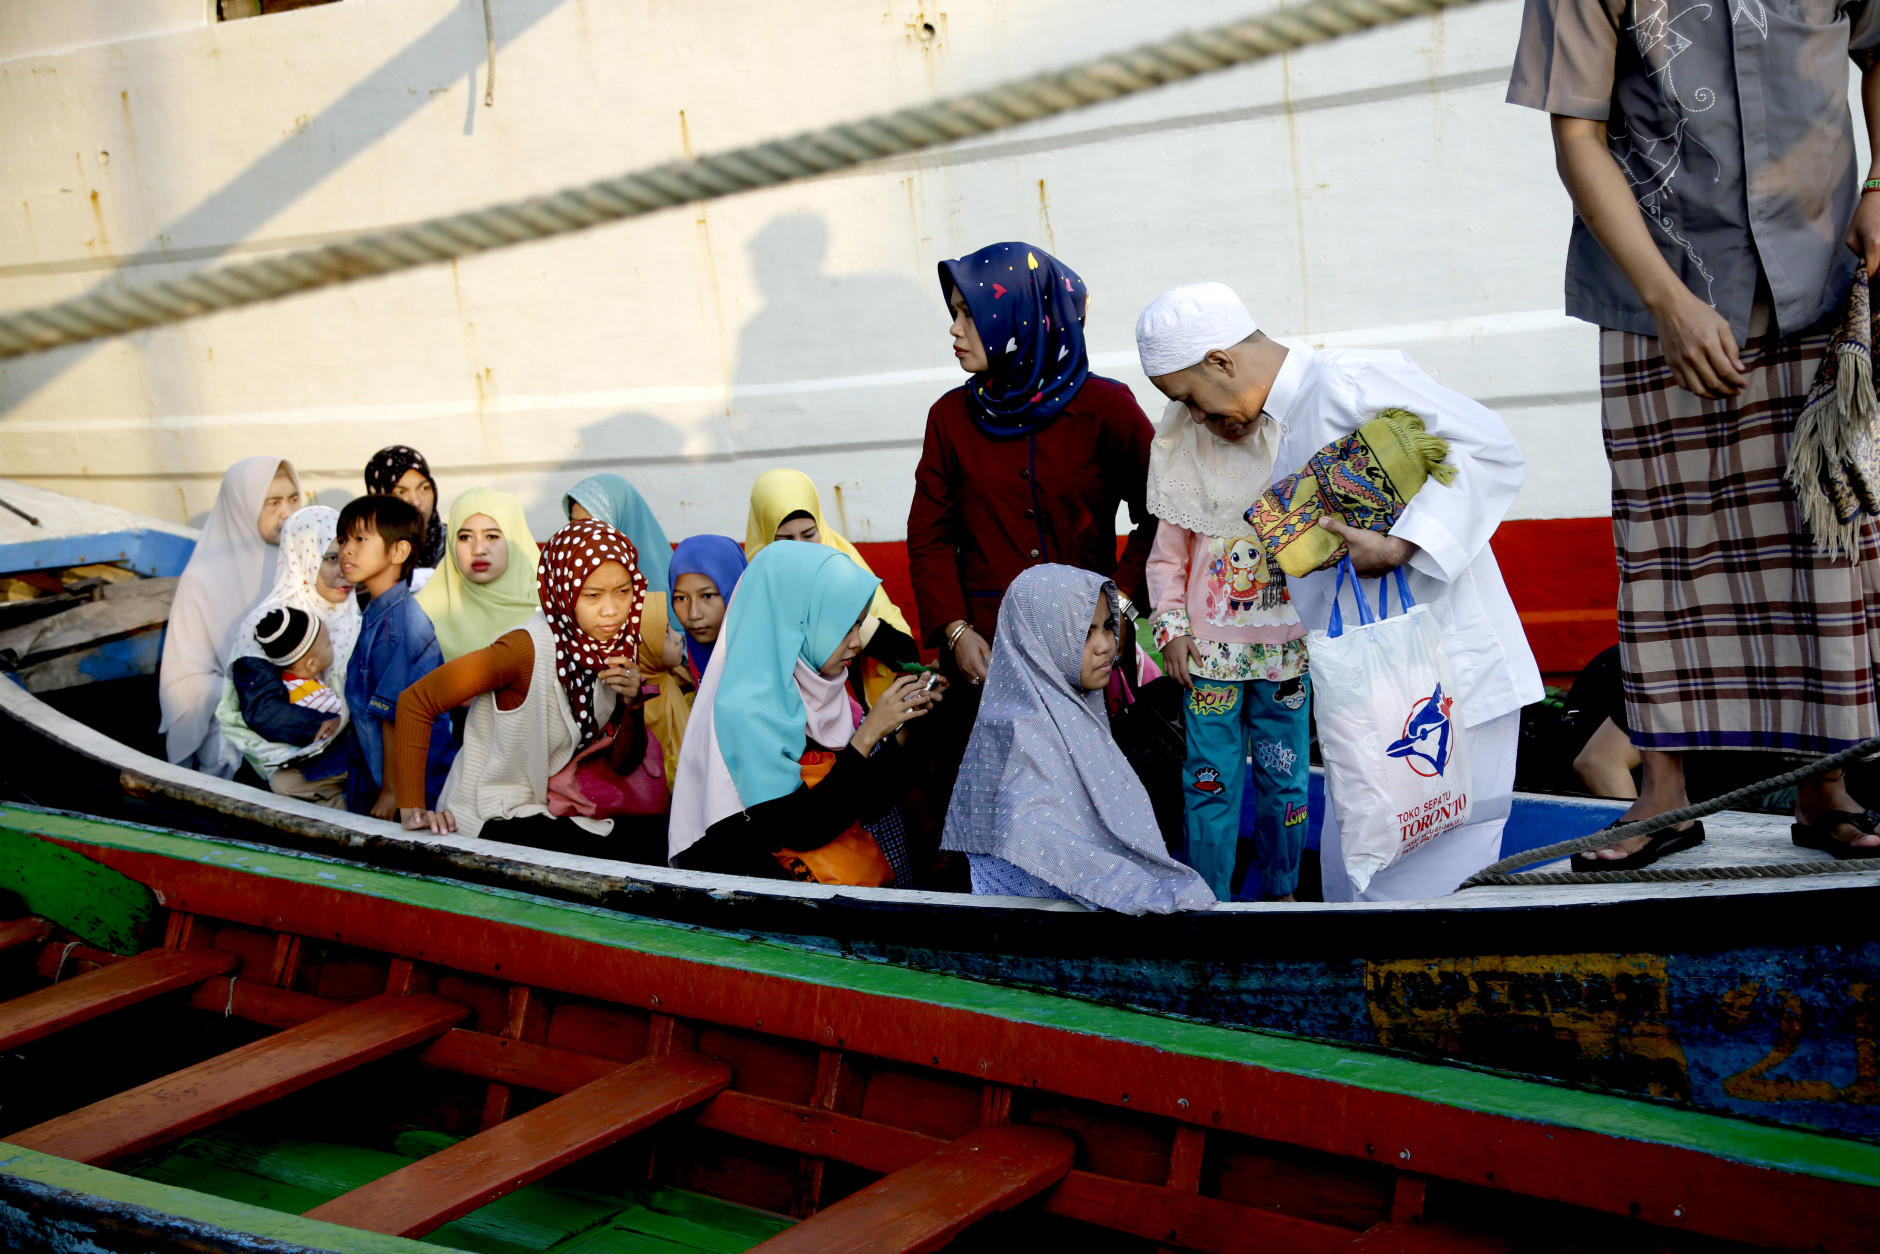 Indonesian Muslims arrive on boats for an Eid al-Fitr prayer to mark the end of the holy fasting month of Ramadan at Sunda Kelapa port in Jakarta, Indonesia, Wednesday, July 6, 2016. (AP Photo/Tatan Syuflana)